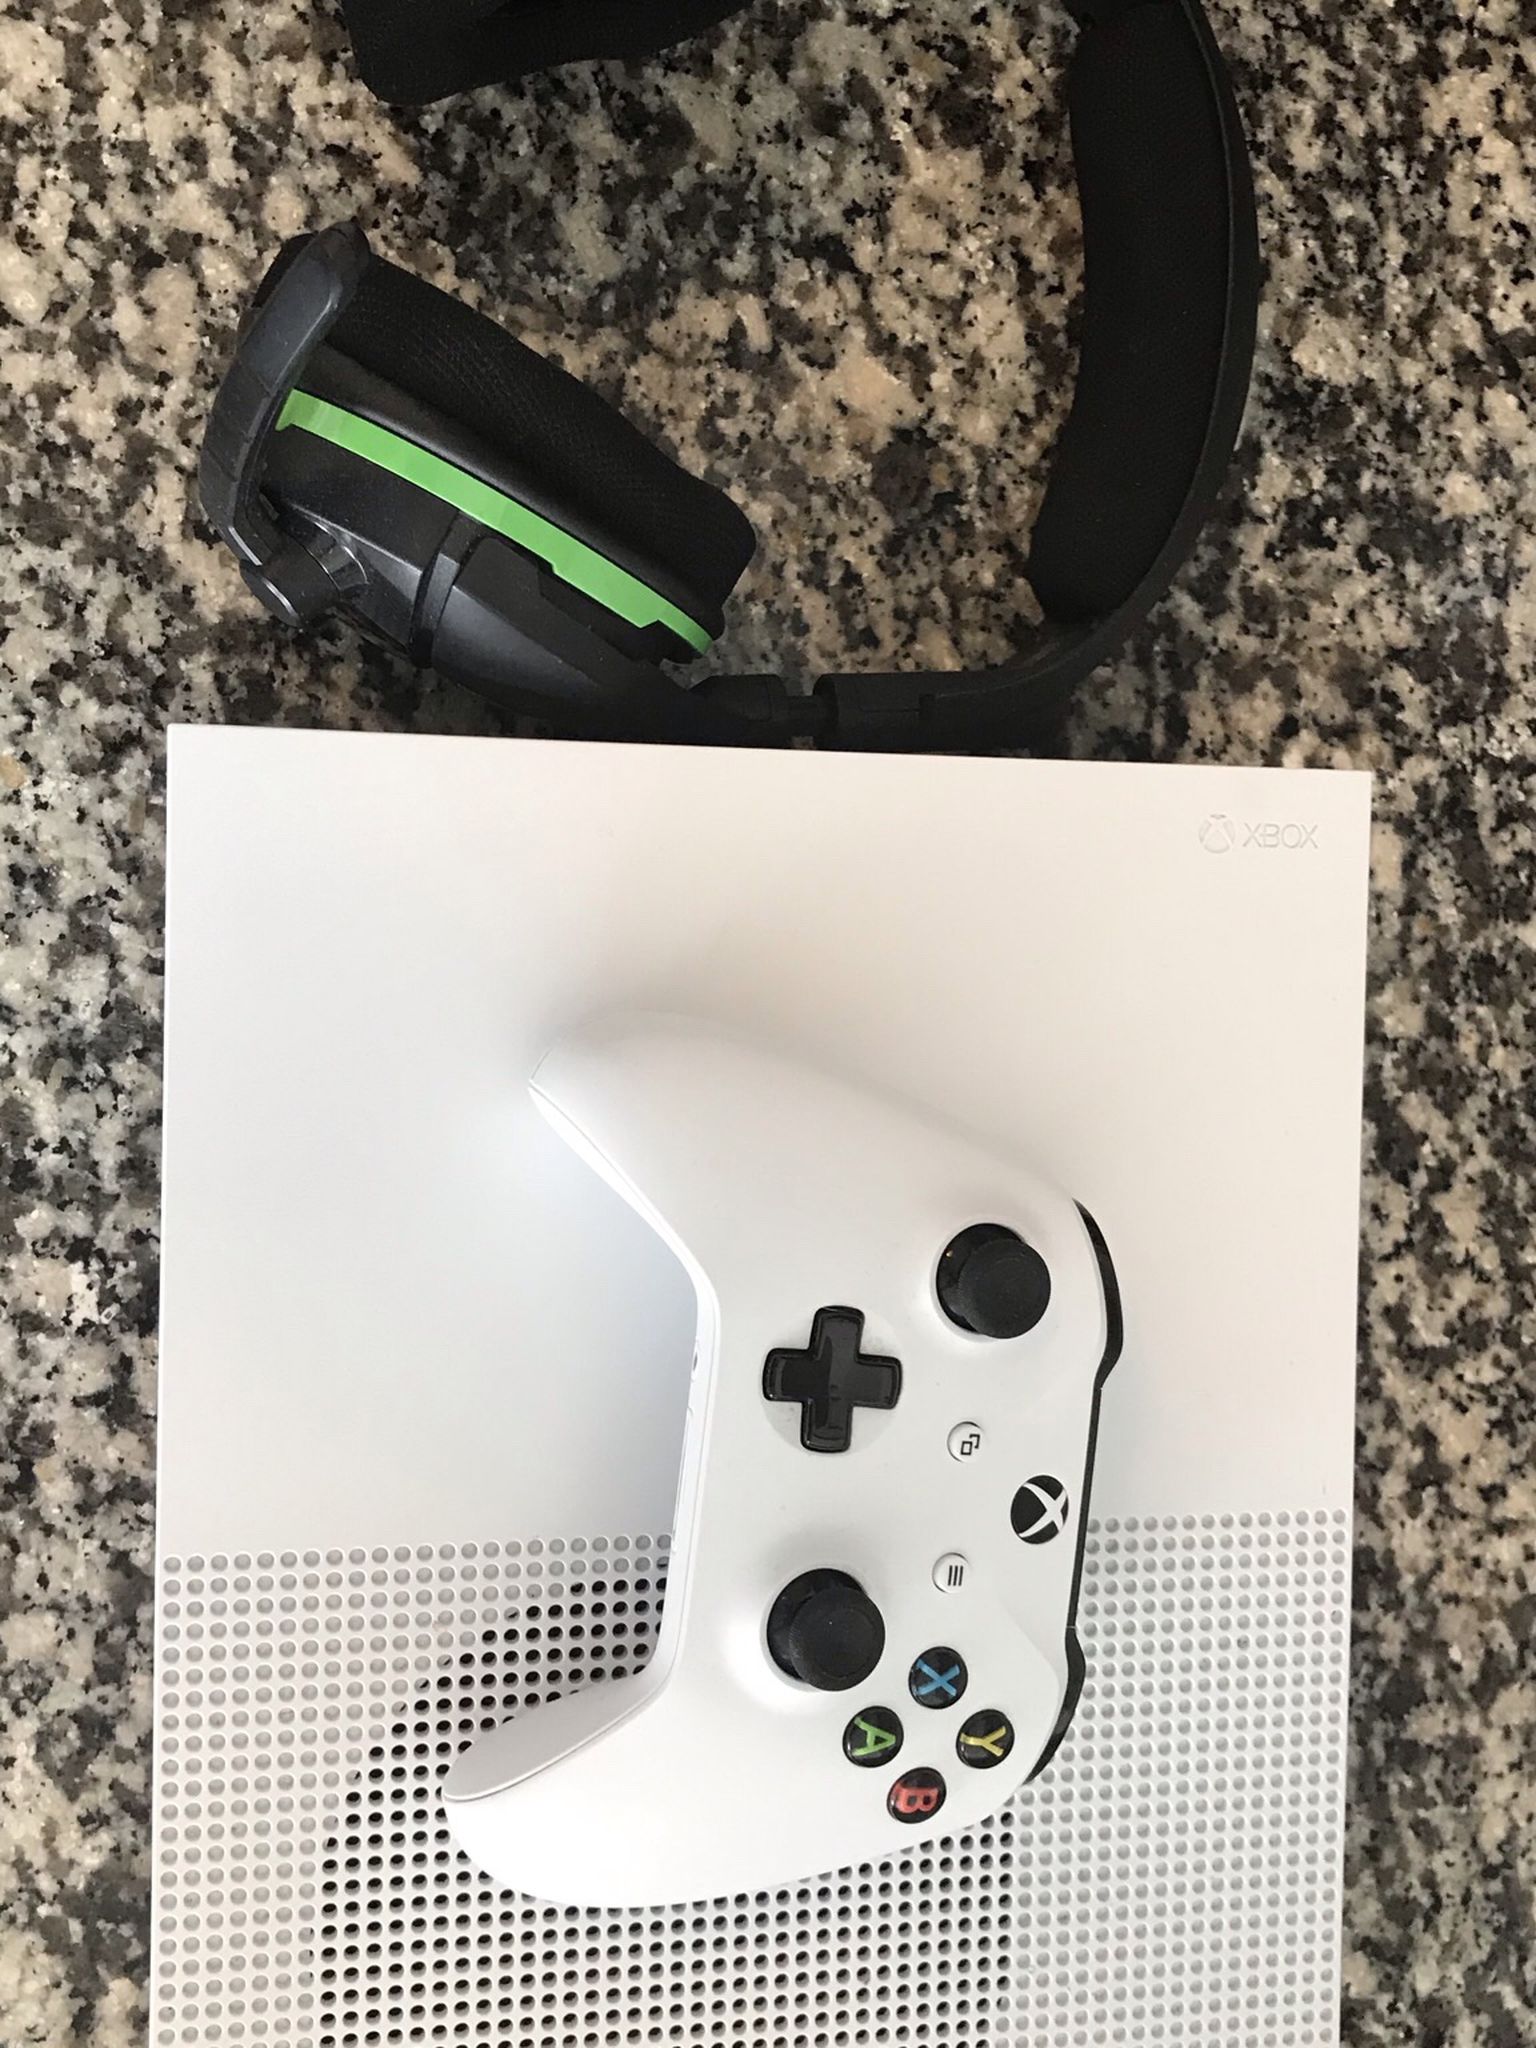 Xbox One S 1Tb Console, Turtle Beach Headphones, and Controller